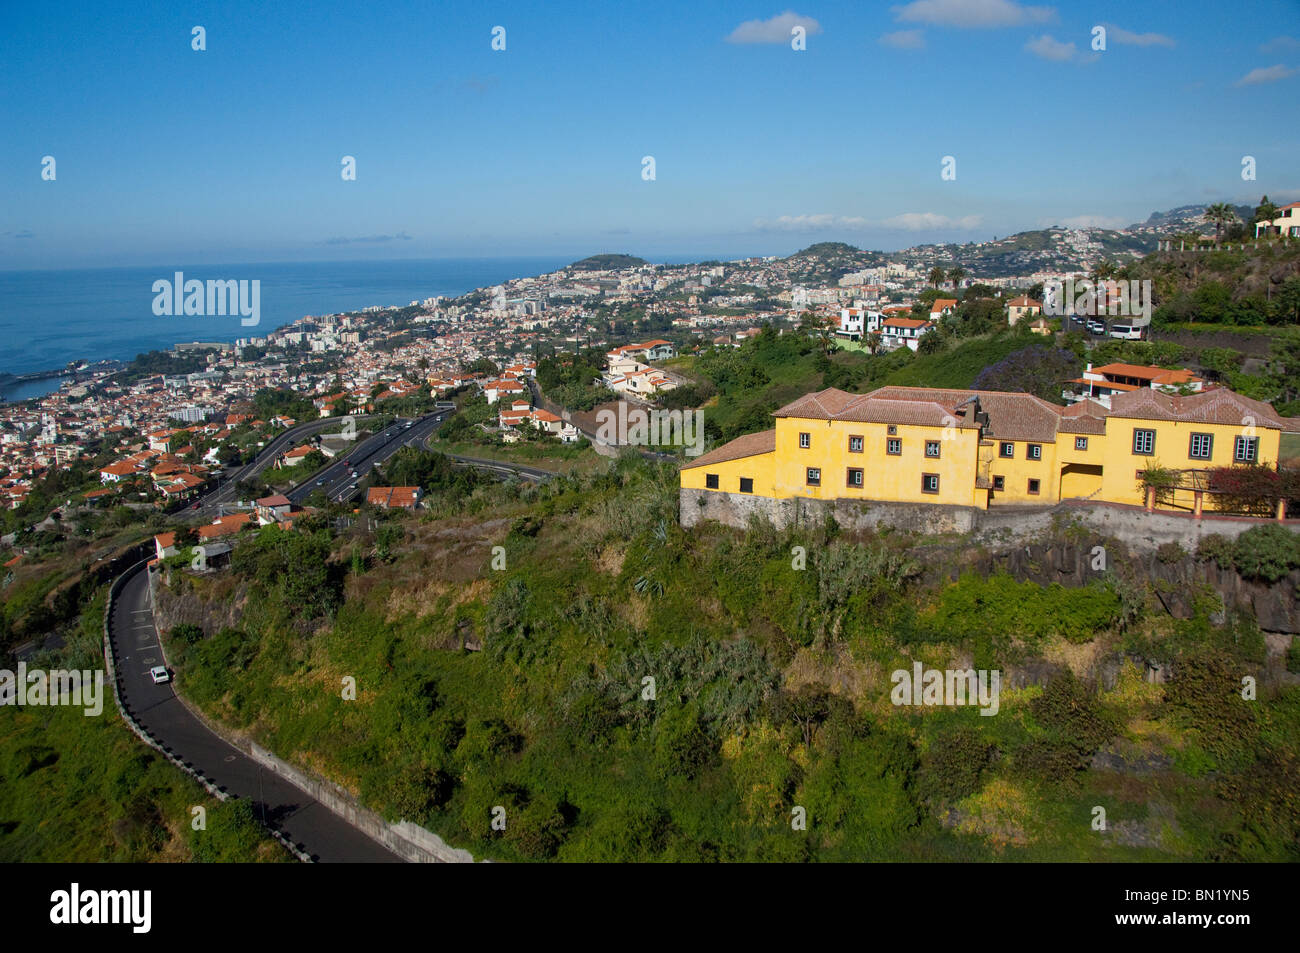 Portugal, Madeira Island, Funchal. Cable car ride from Funchal to Monte. Roof top View from cable car. Stock Photo